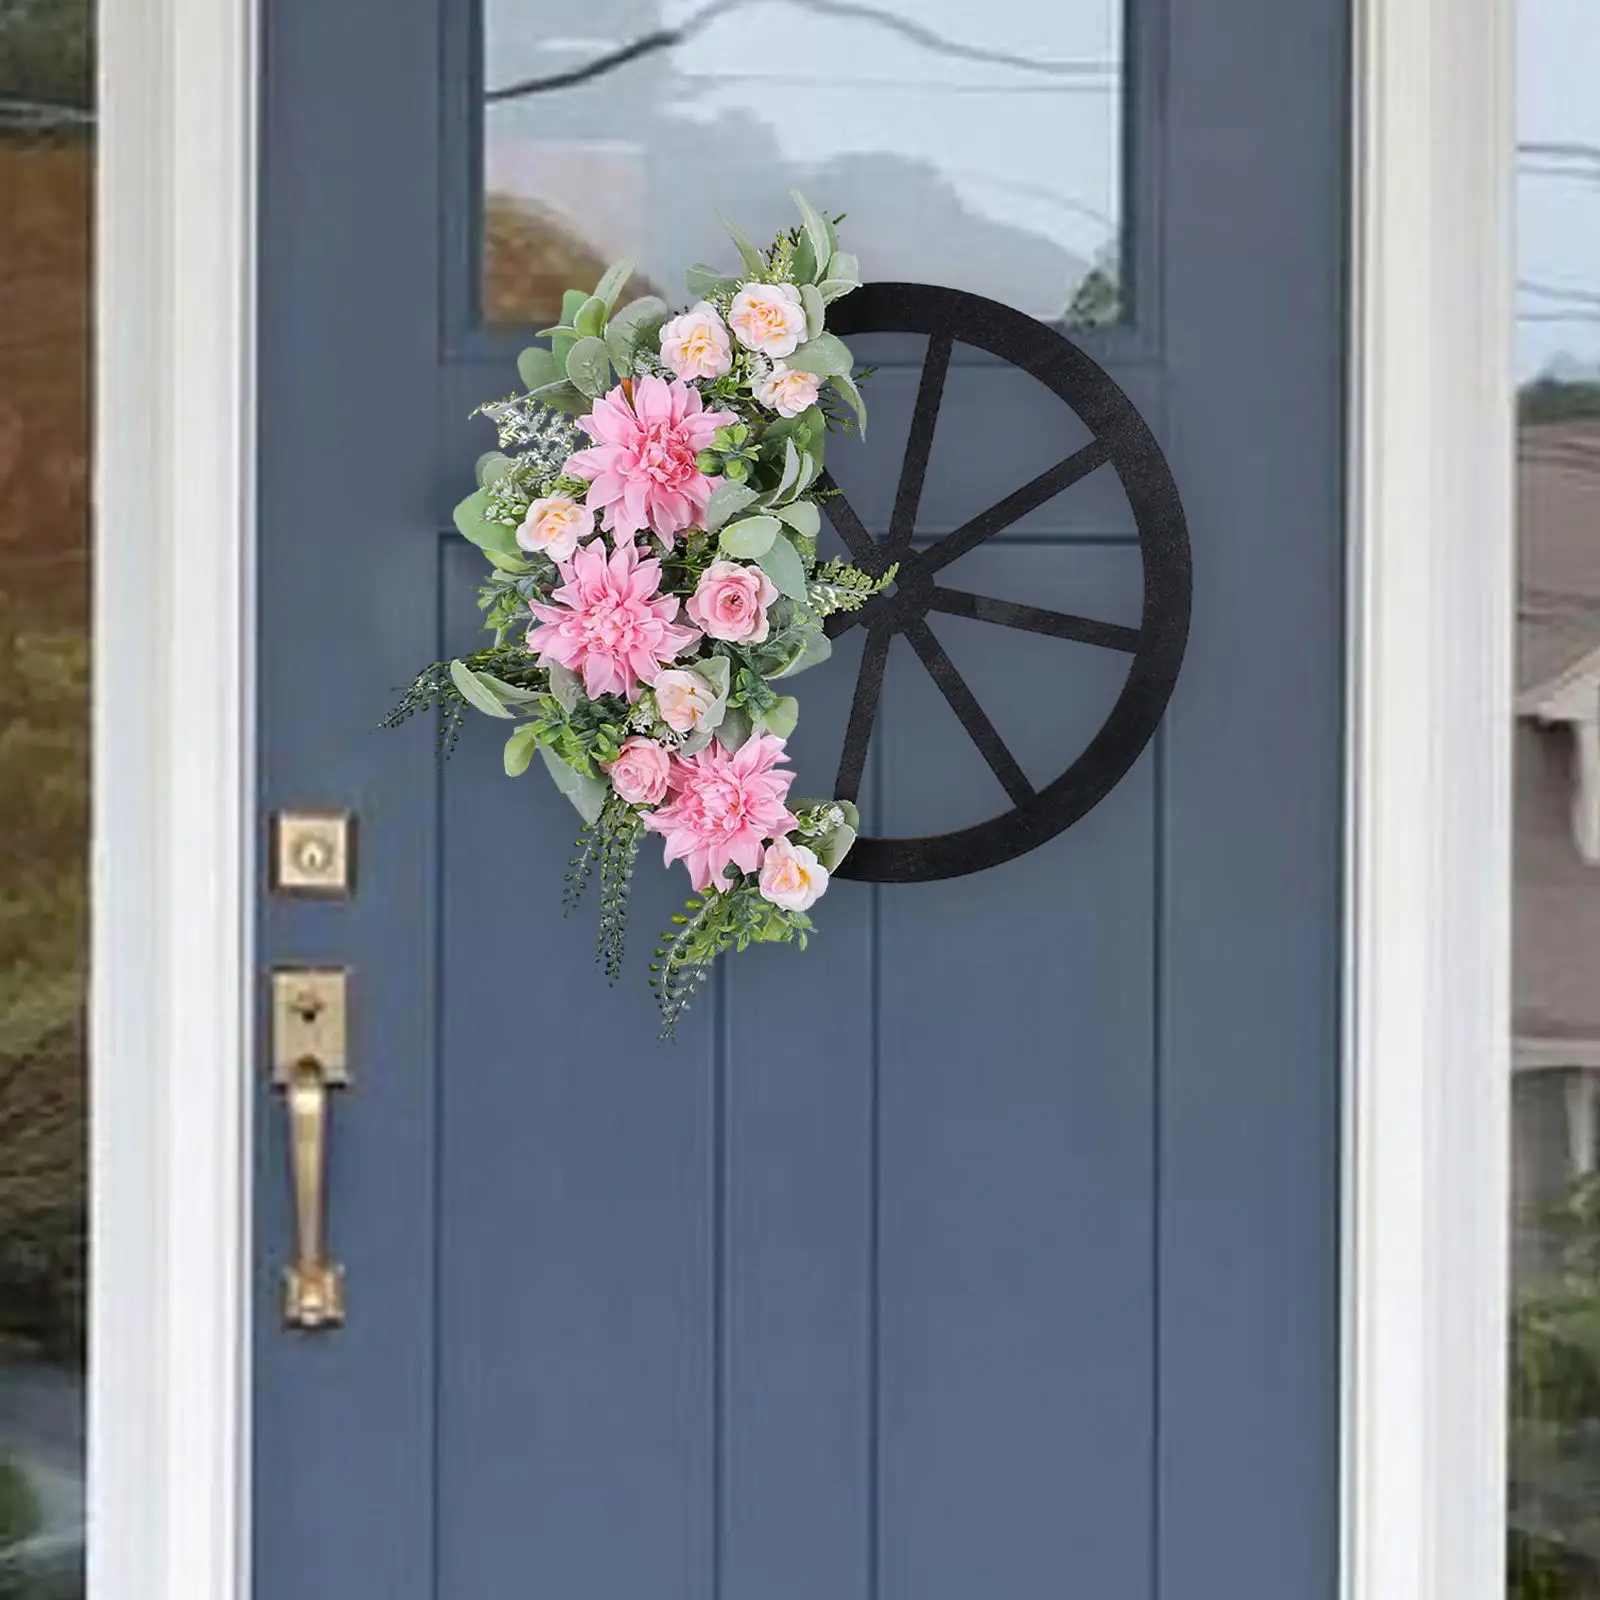 Spring Wreath Pink Artificial Flowers and Wheel Decoration 16.9x16.5inch Lifelike for Outside Farmhouse Decor Multipurpose